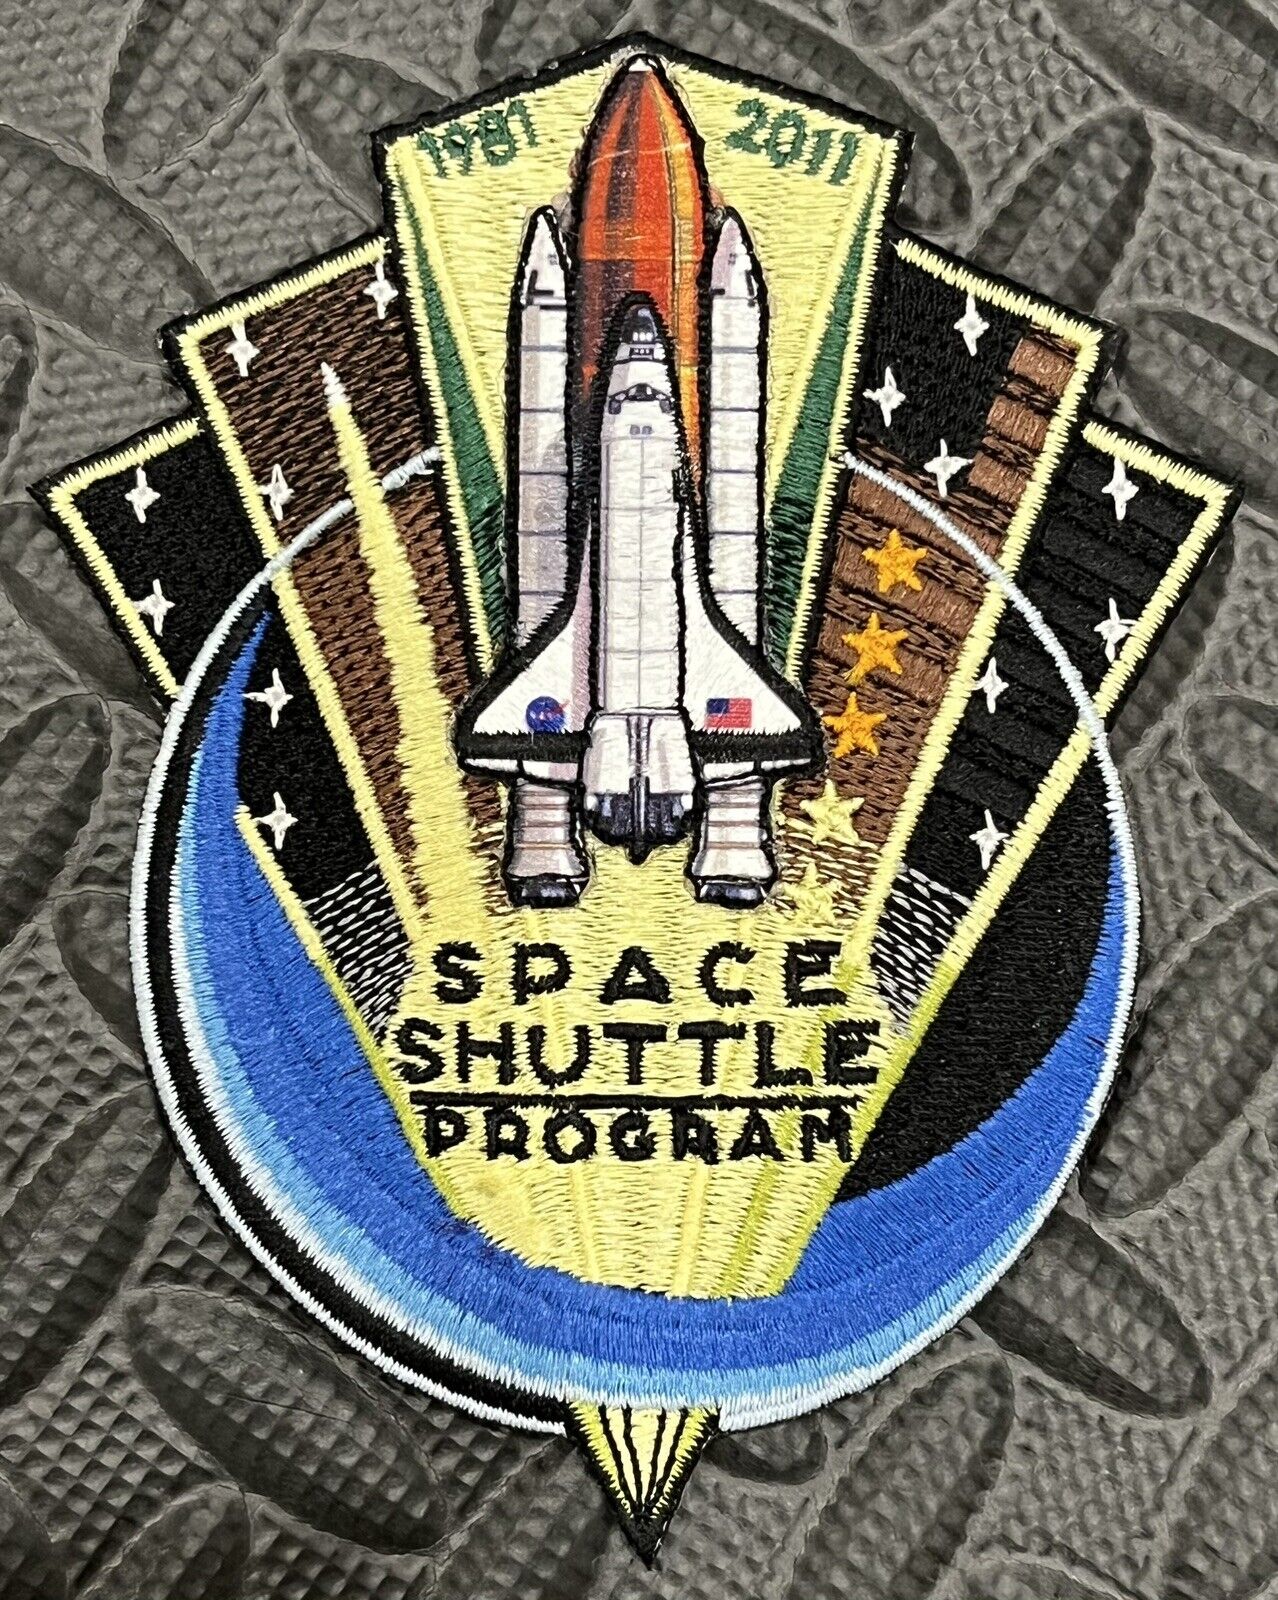 NASA End Of The Space Shuttle Program 1981-2011 Patch